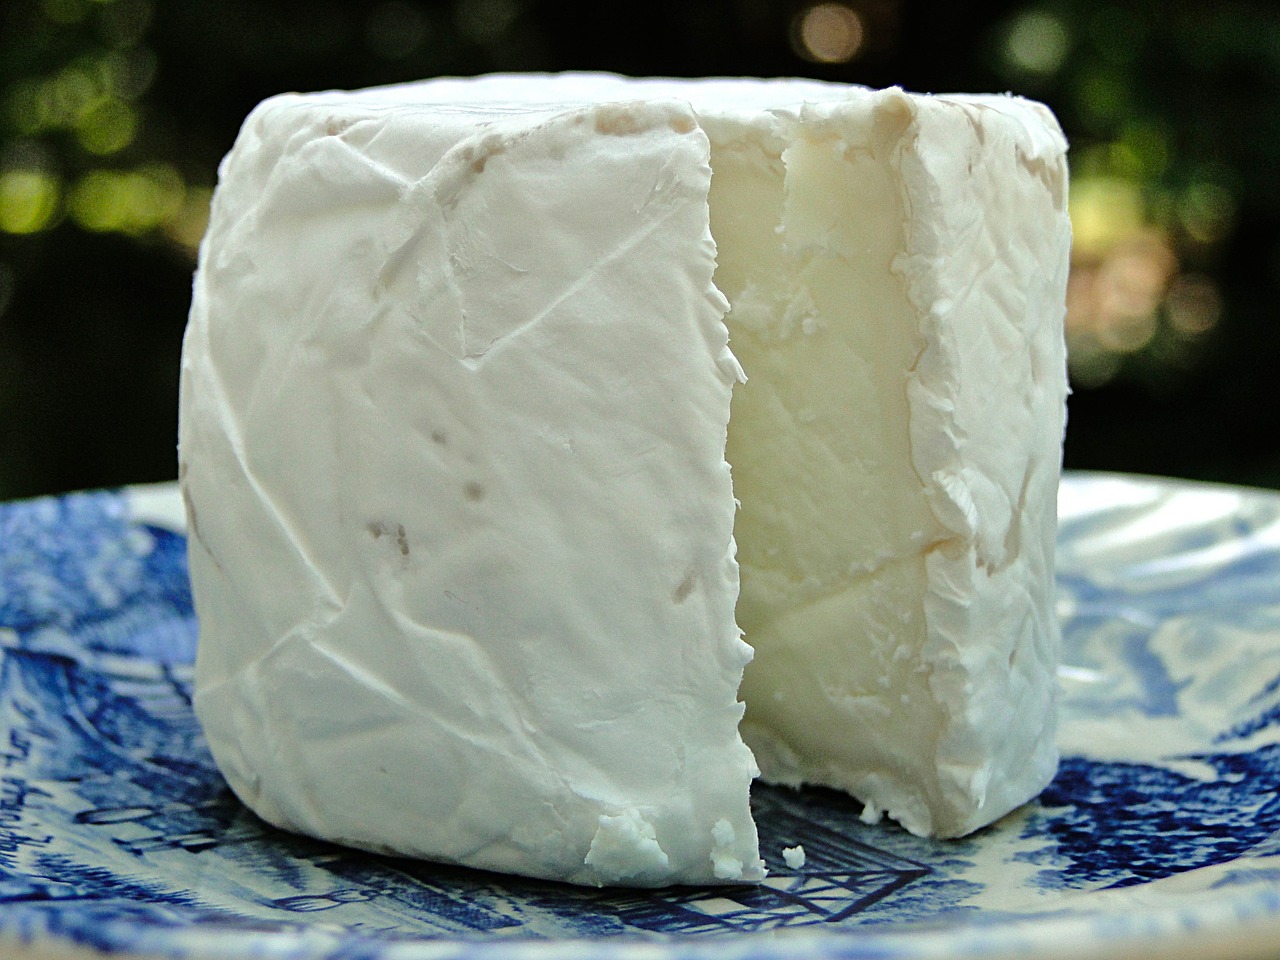 white goat cheese on blue plate